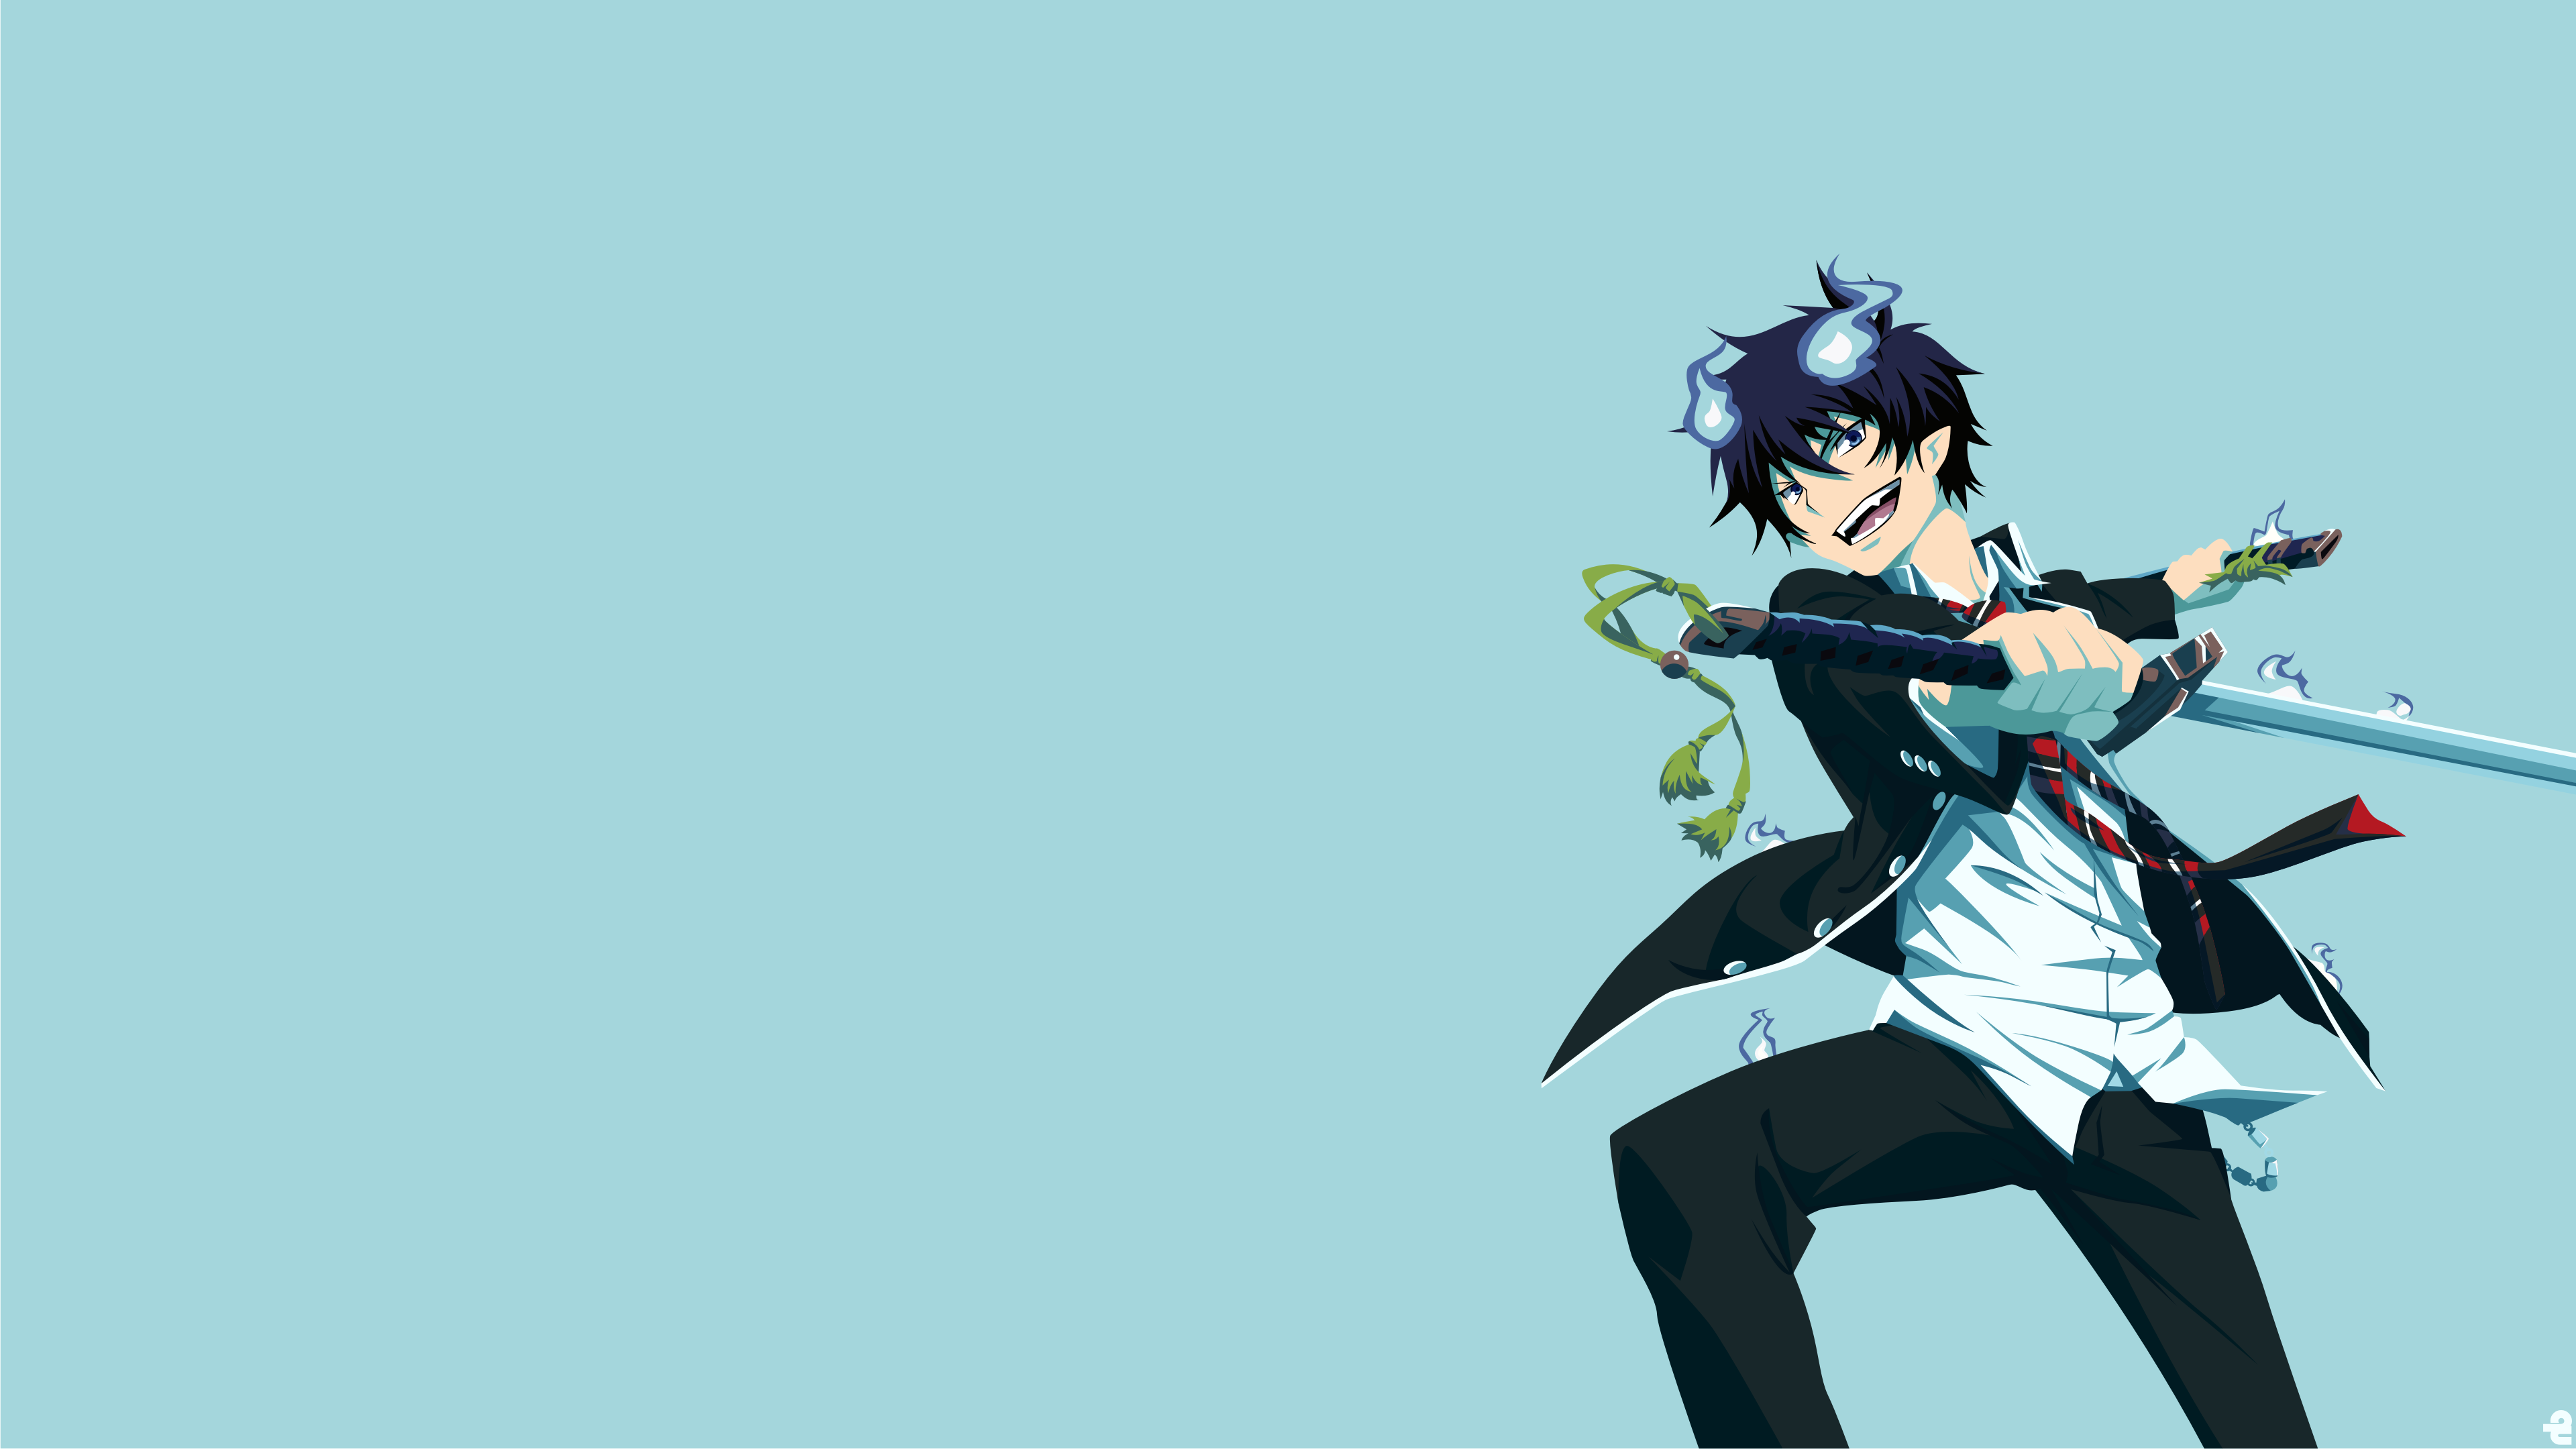 1. "Blue Exorcist" - wide 8